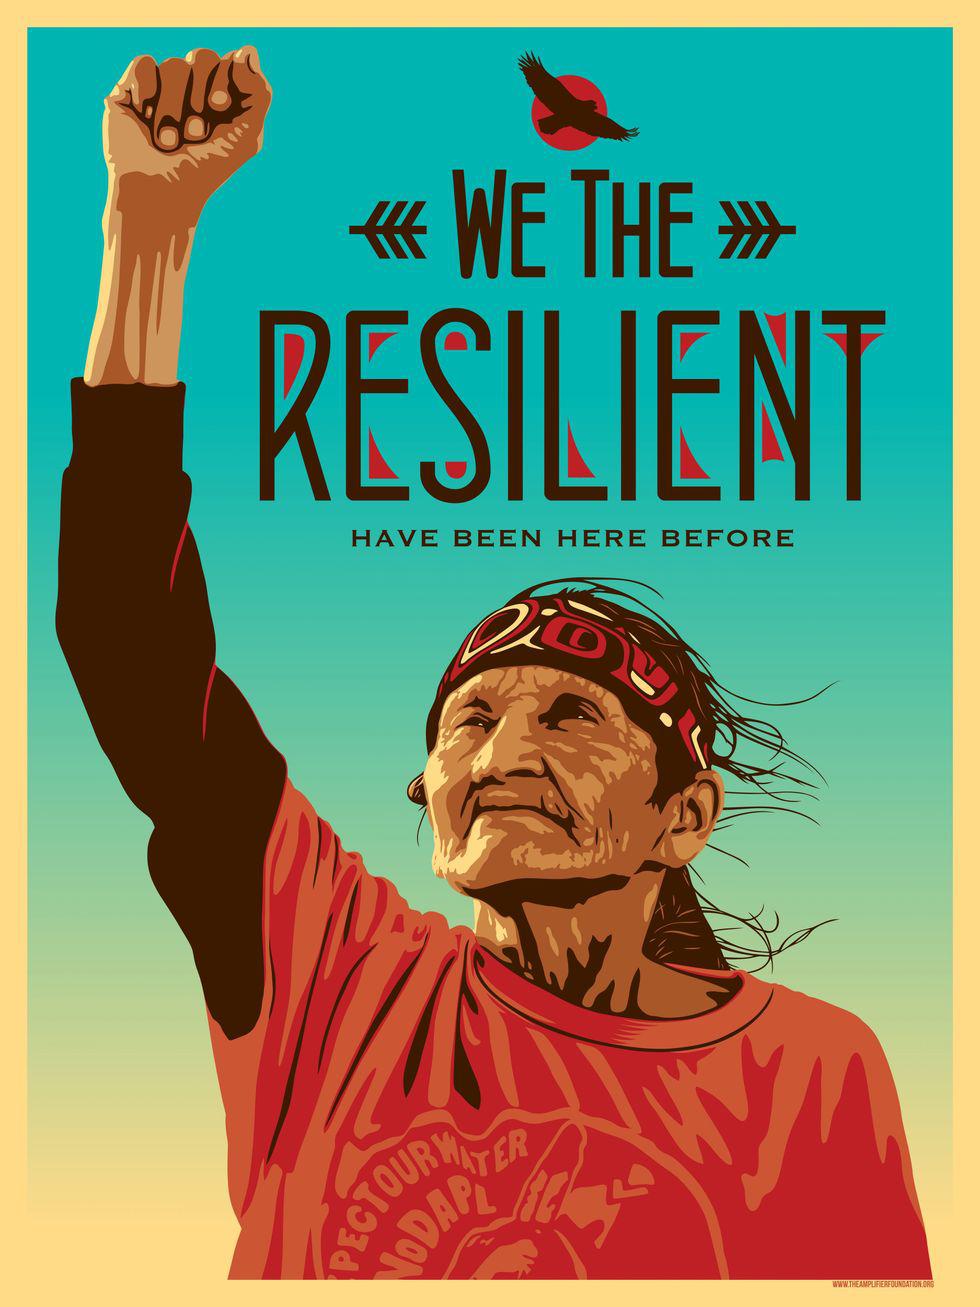 We The People - Ernest Yerena, "We The Resilient"